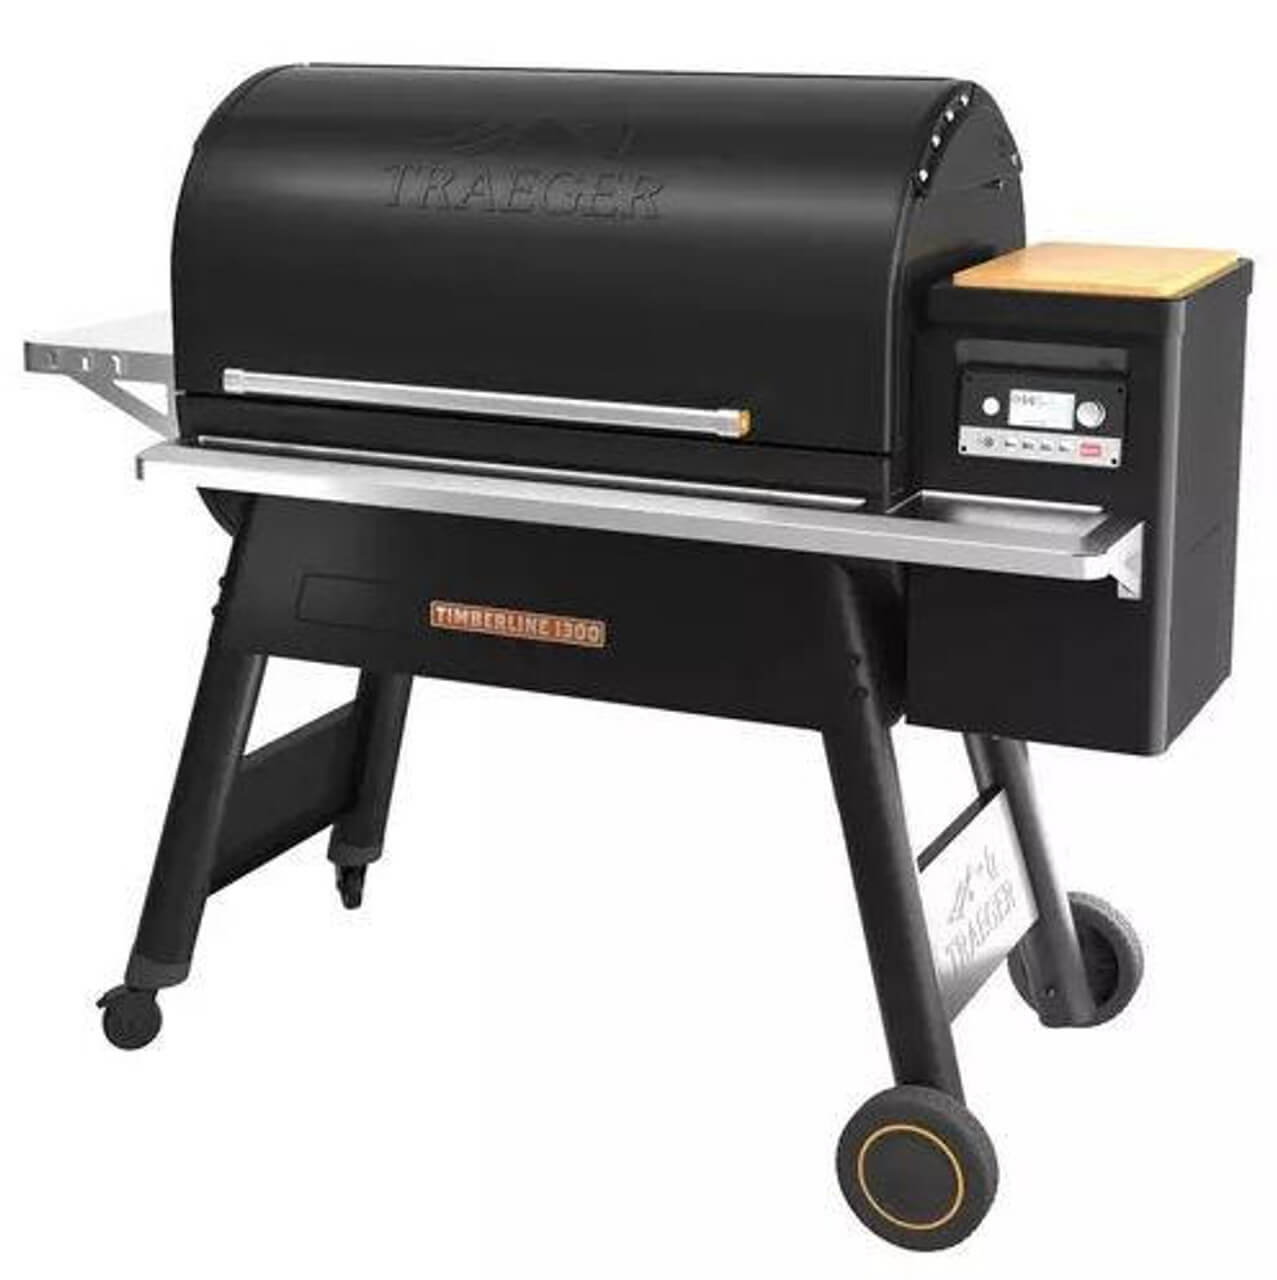 Timberline Series 1300 black pellet grill with white background